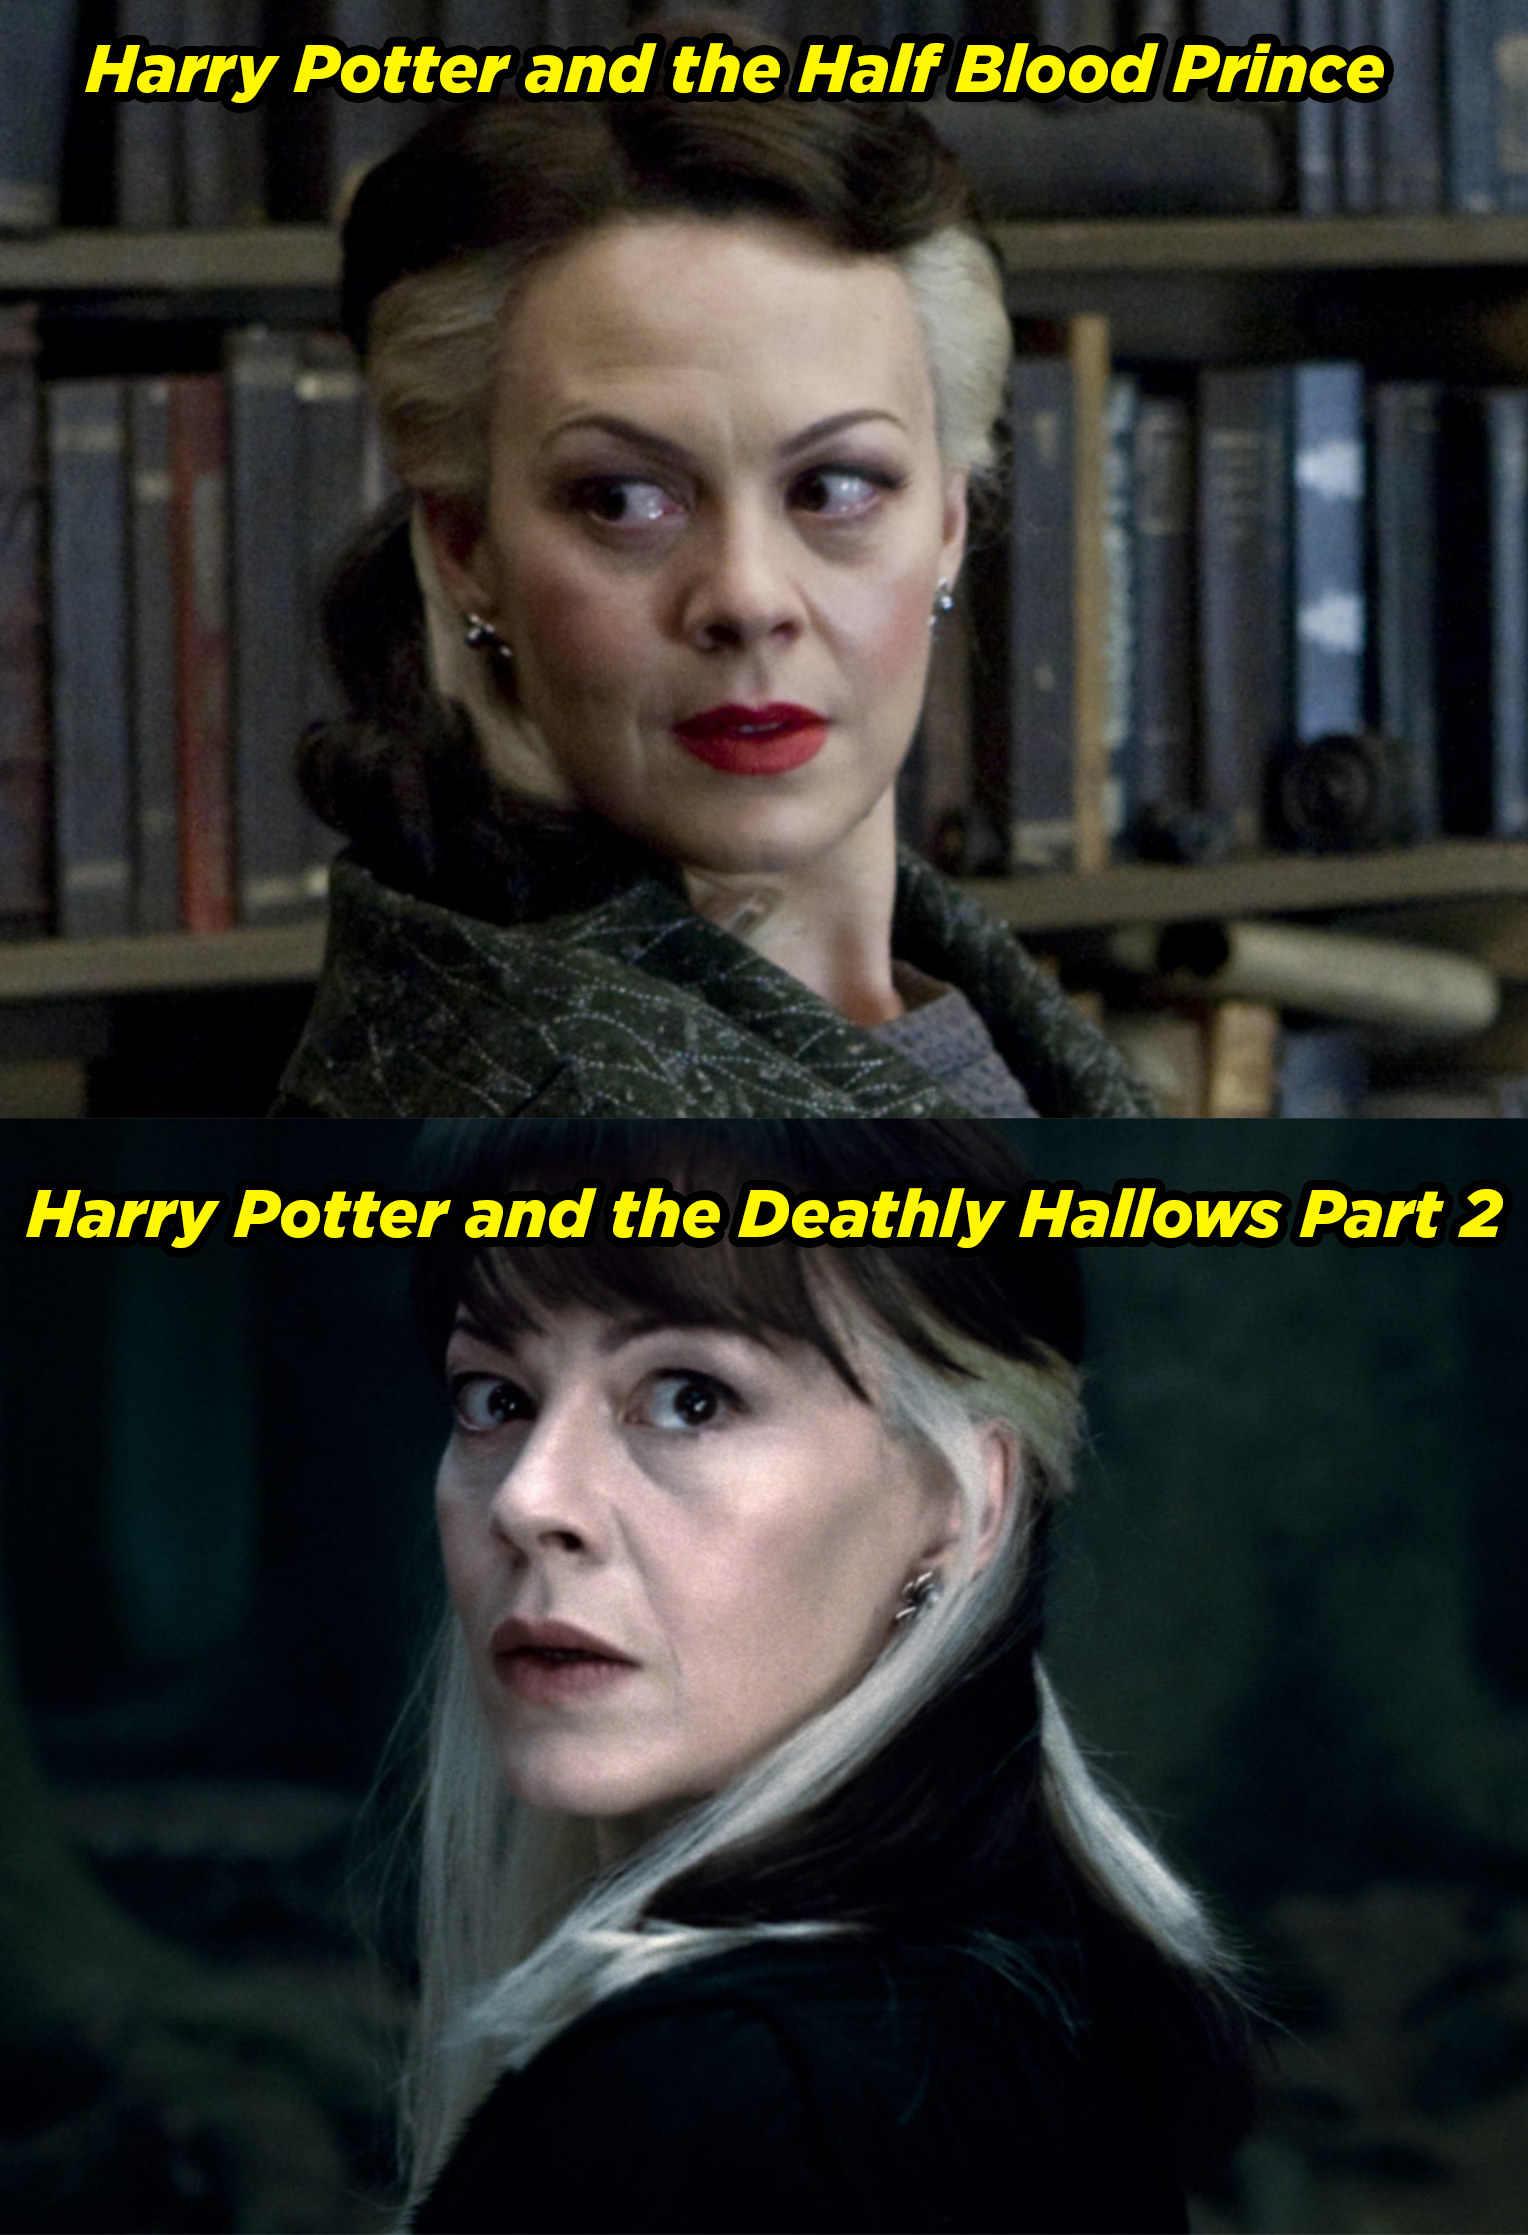 Helen McCrory in the Half-Blood Prince and Deathly Hallows Part 2